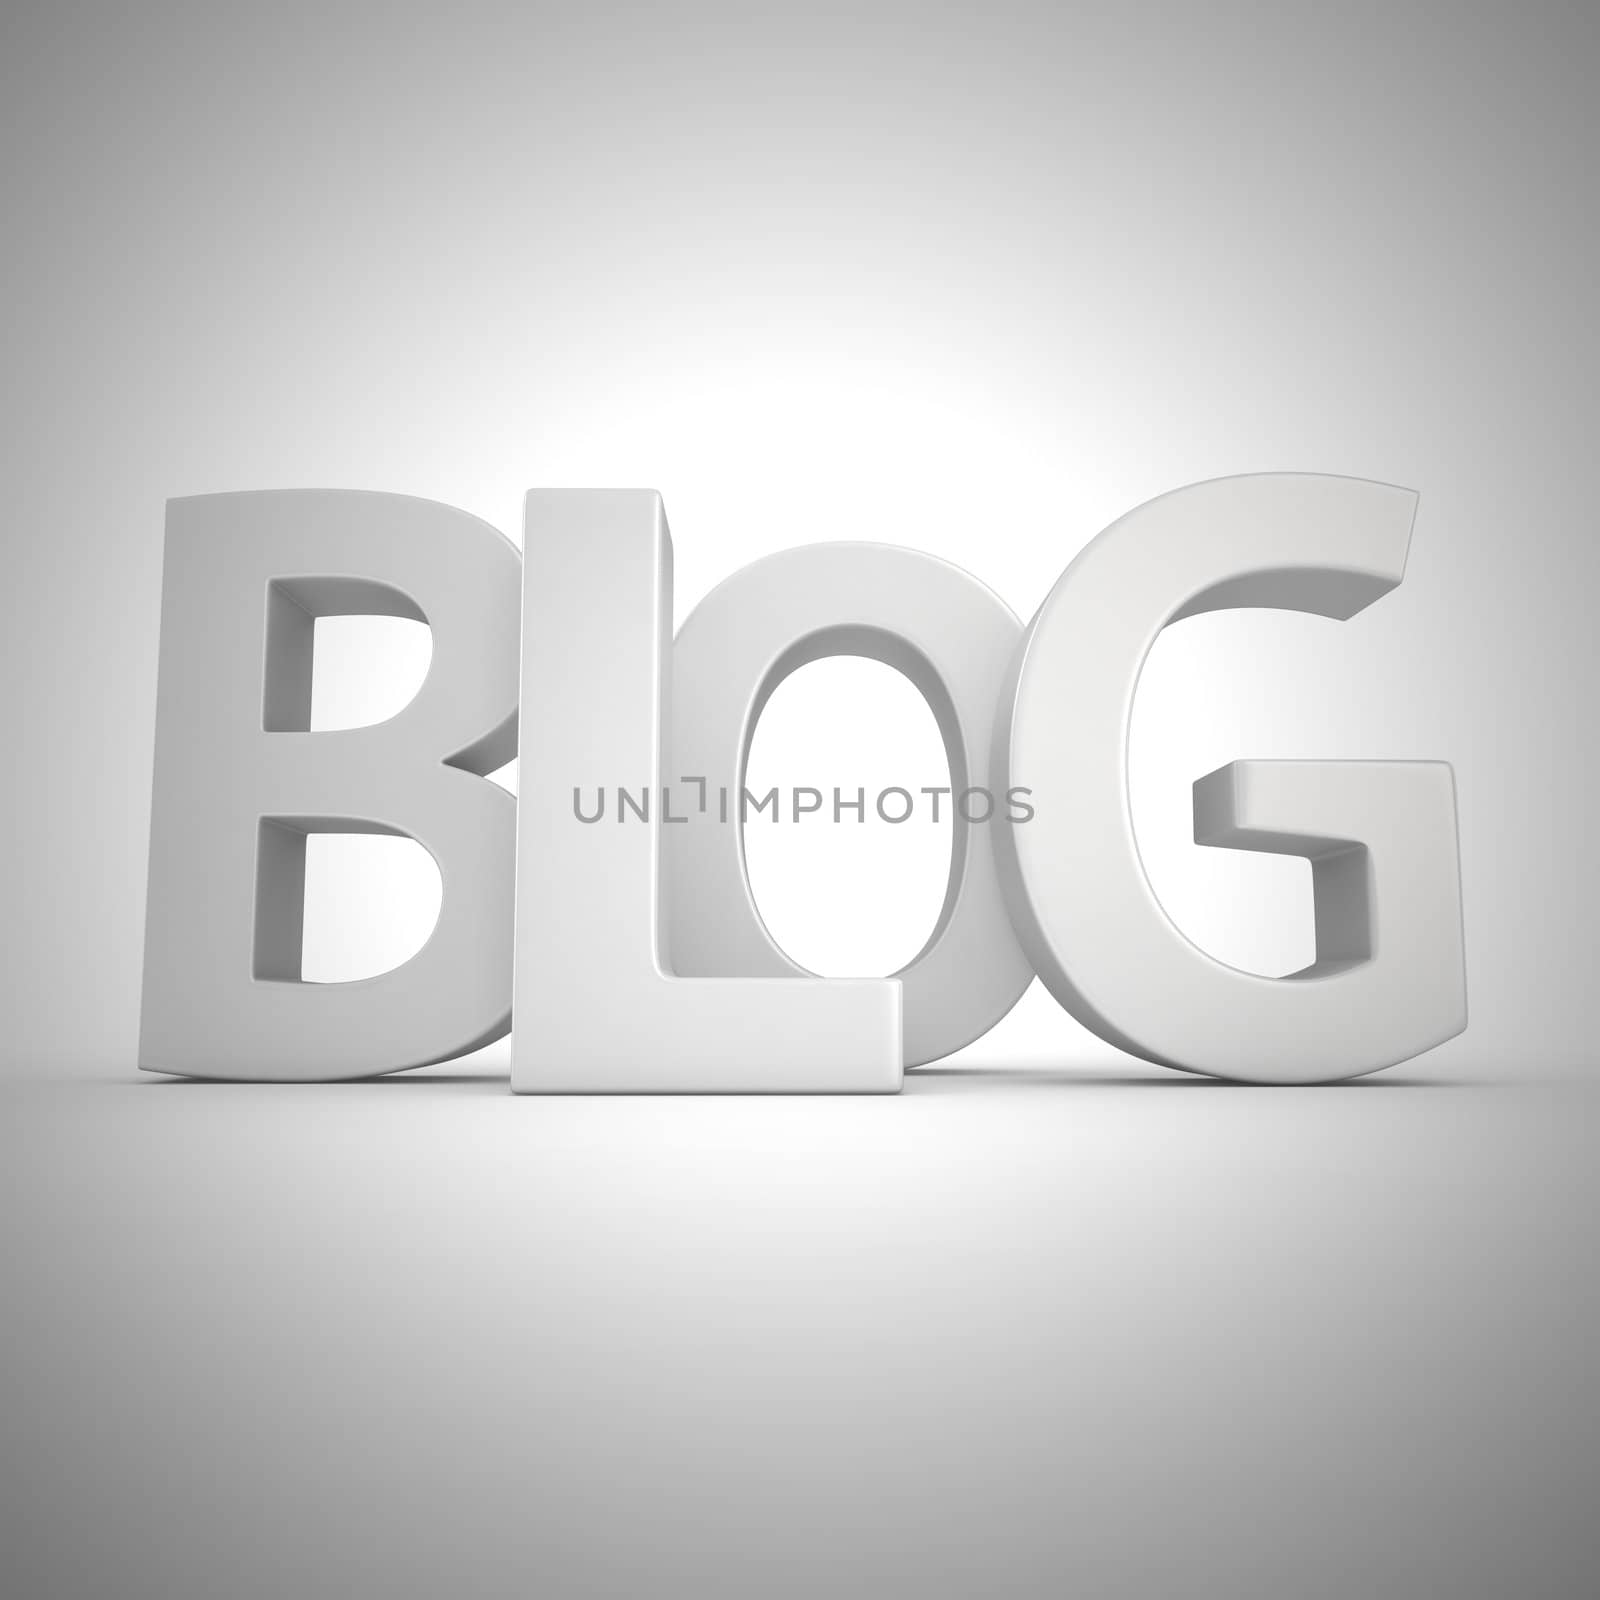 Word "Blog" written by white letters